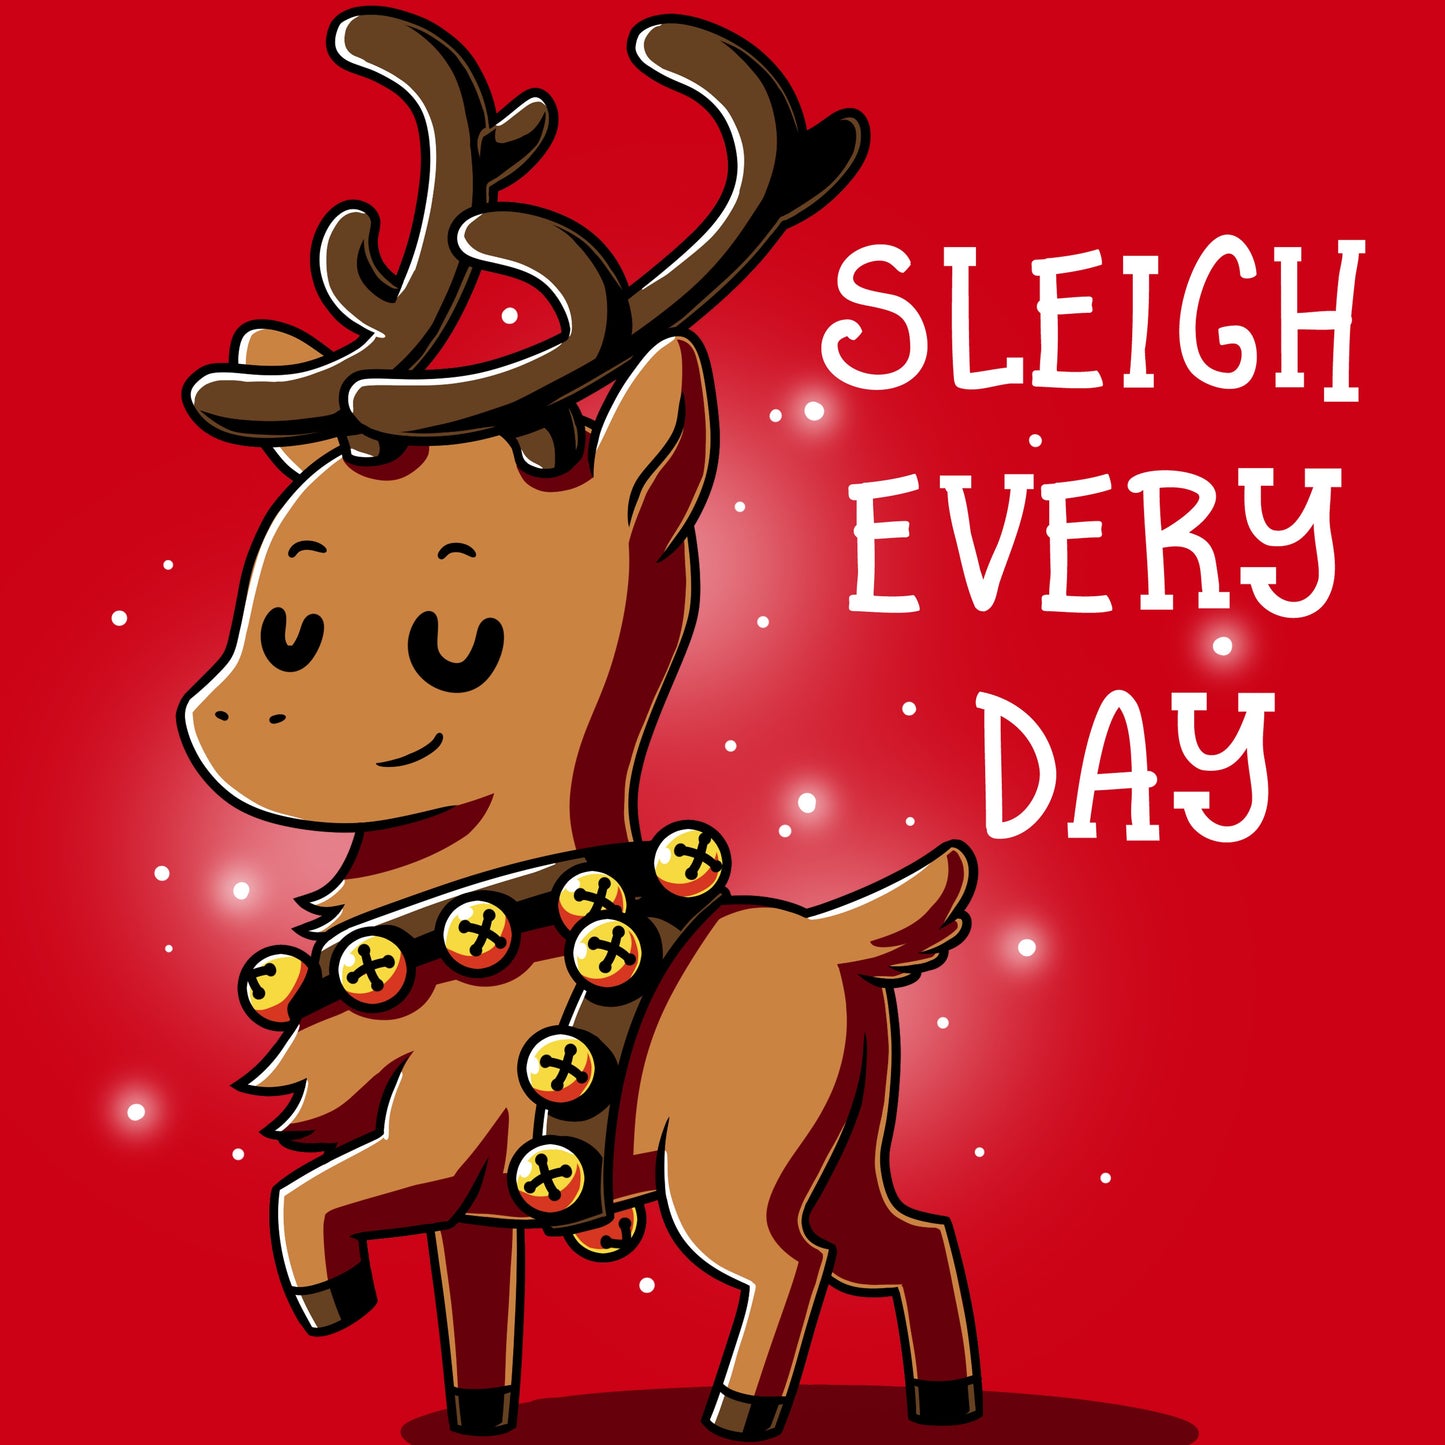 A cartoon reindeer wearing a red TeeTurtle T-shirt that says "Sleigh Every Day".